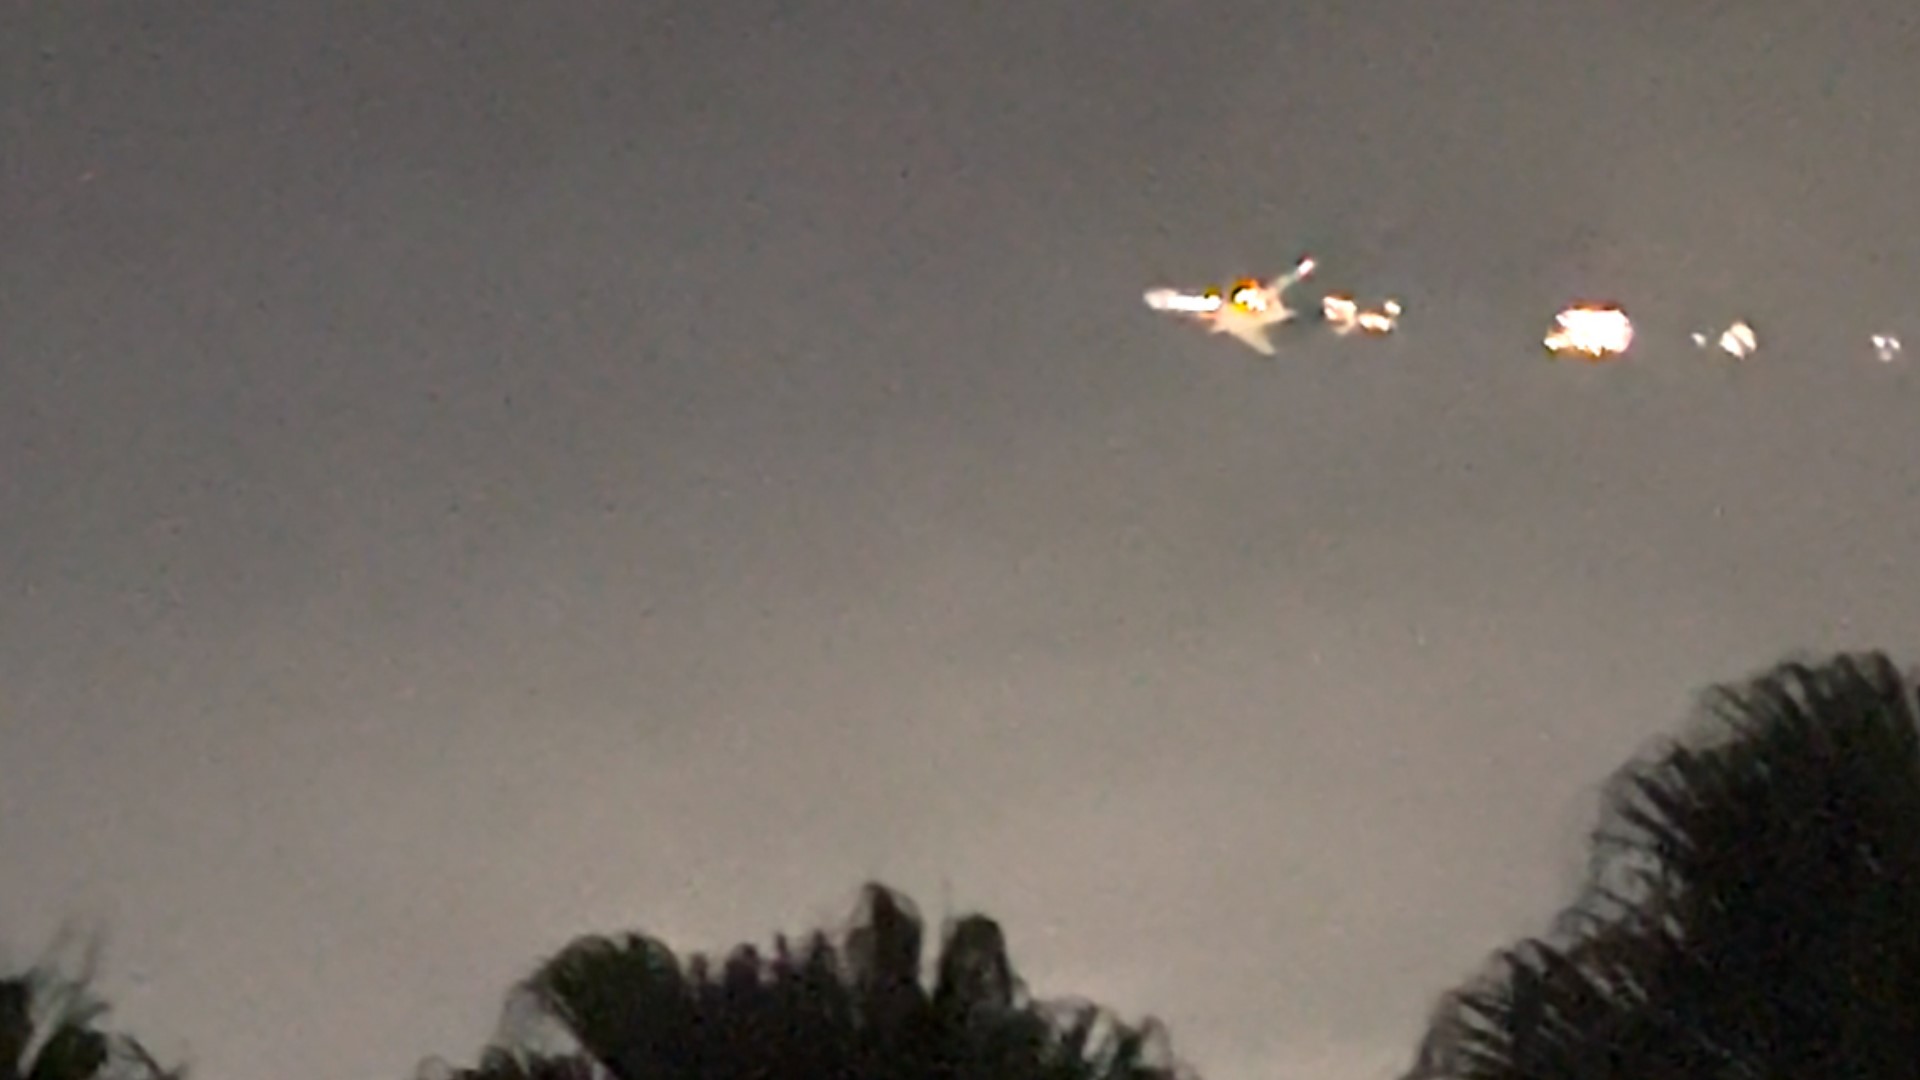 A witness saw sparks shooting from a cargo plane as it made an emergency landing at Miami International Airport shortly after takeoff.